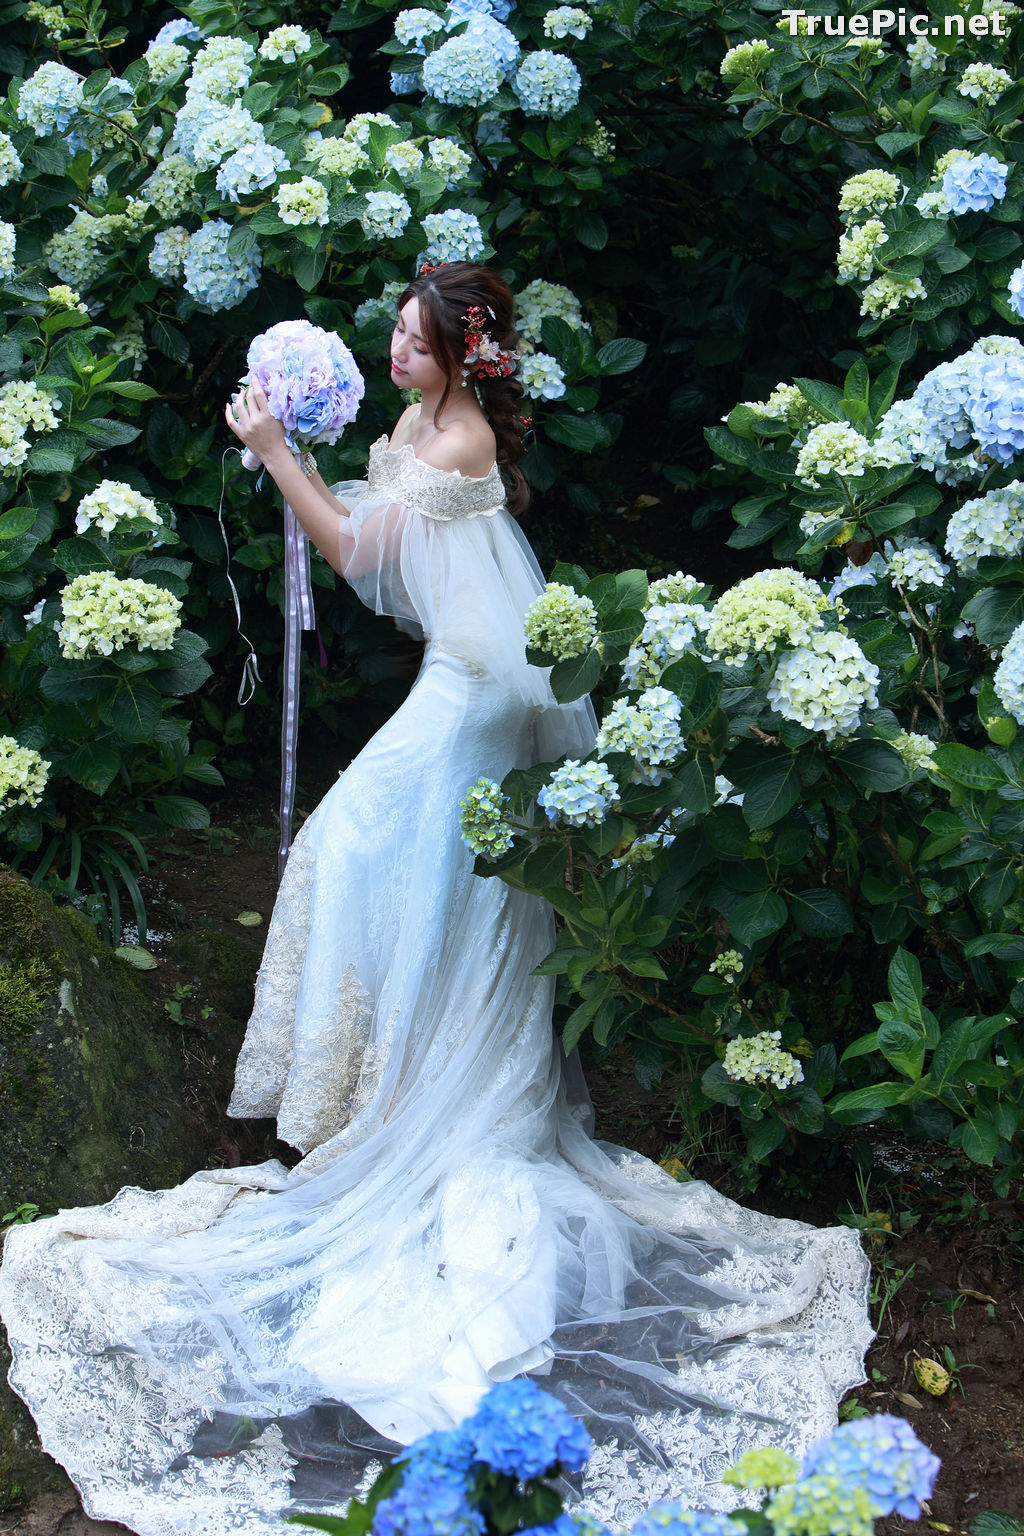 Image Taiwanese Model - 張倫甄 - Beautiful Bride and Hydrangea Flowers - TruePic.net - Picture-16